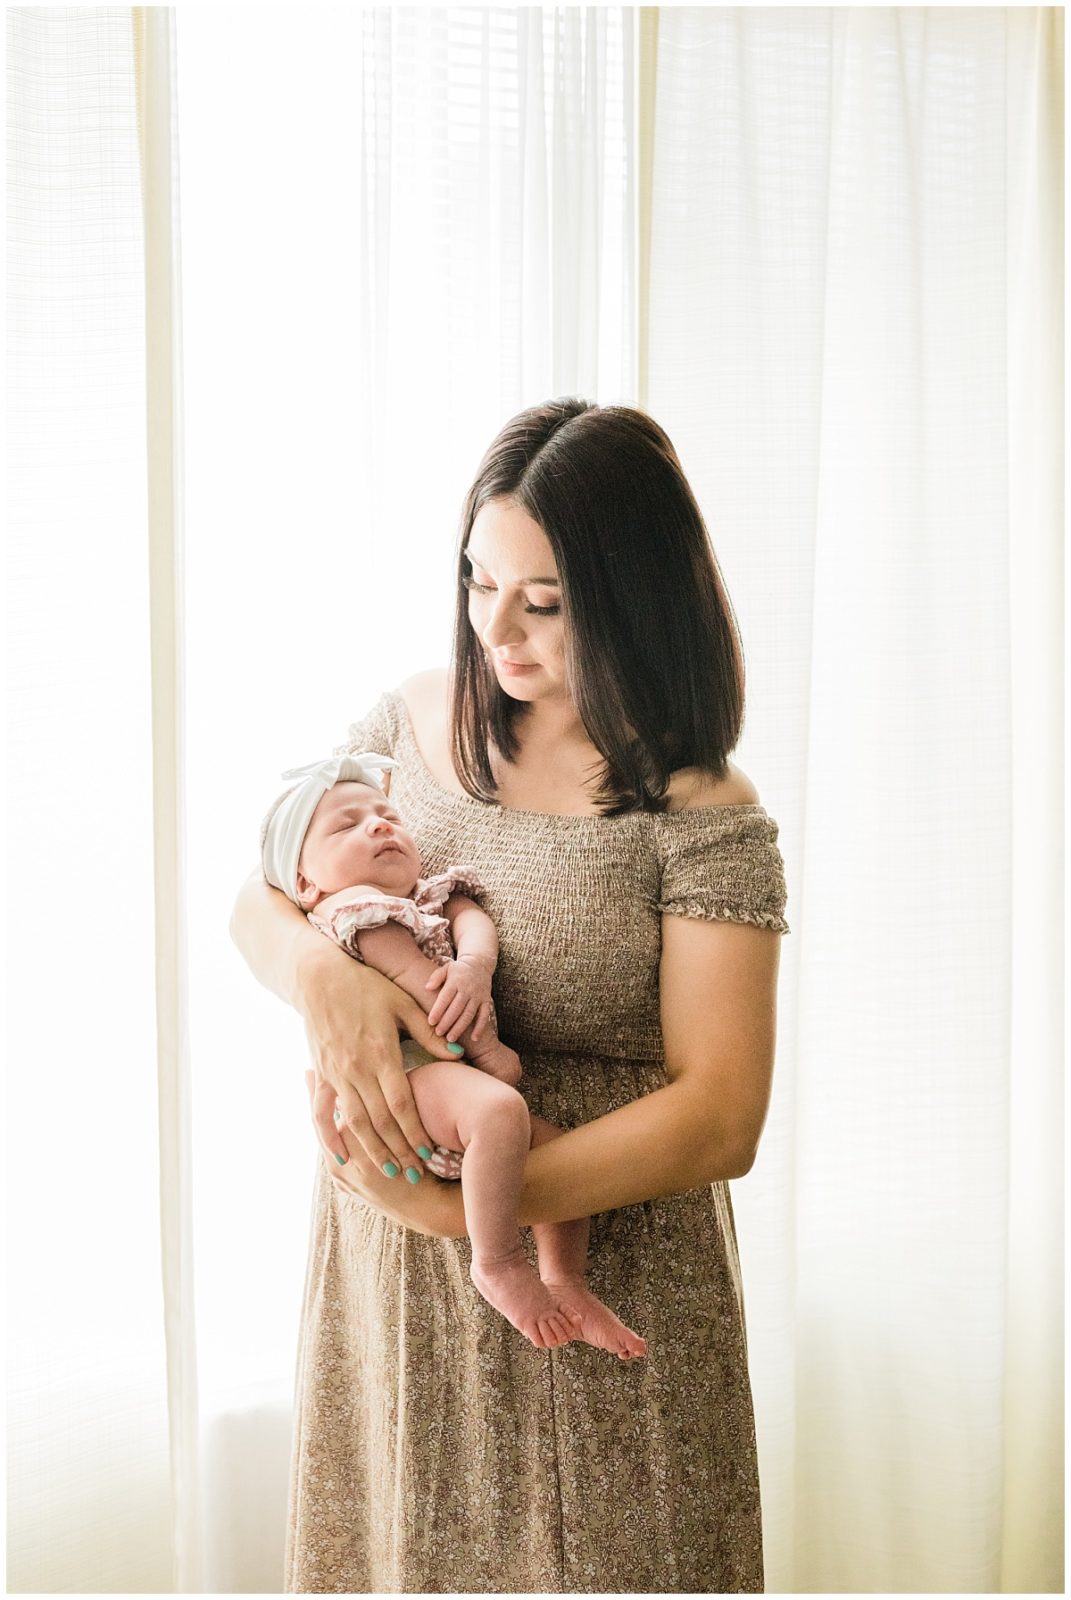 First time mom and newborn photos